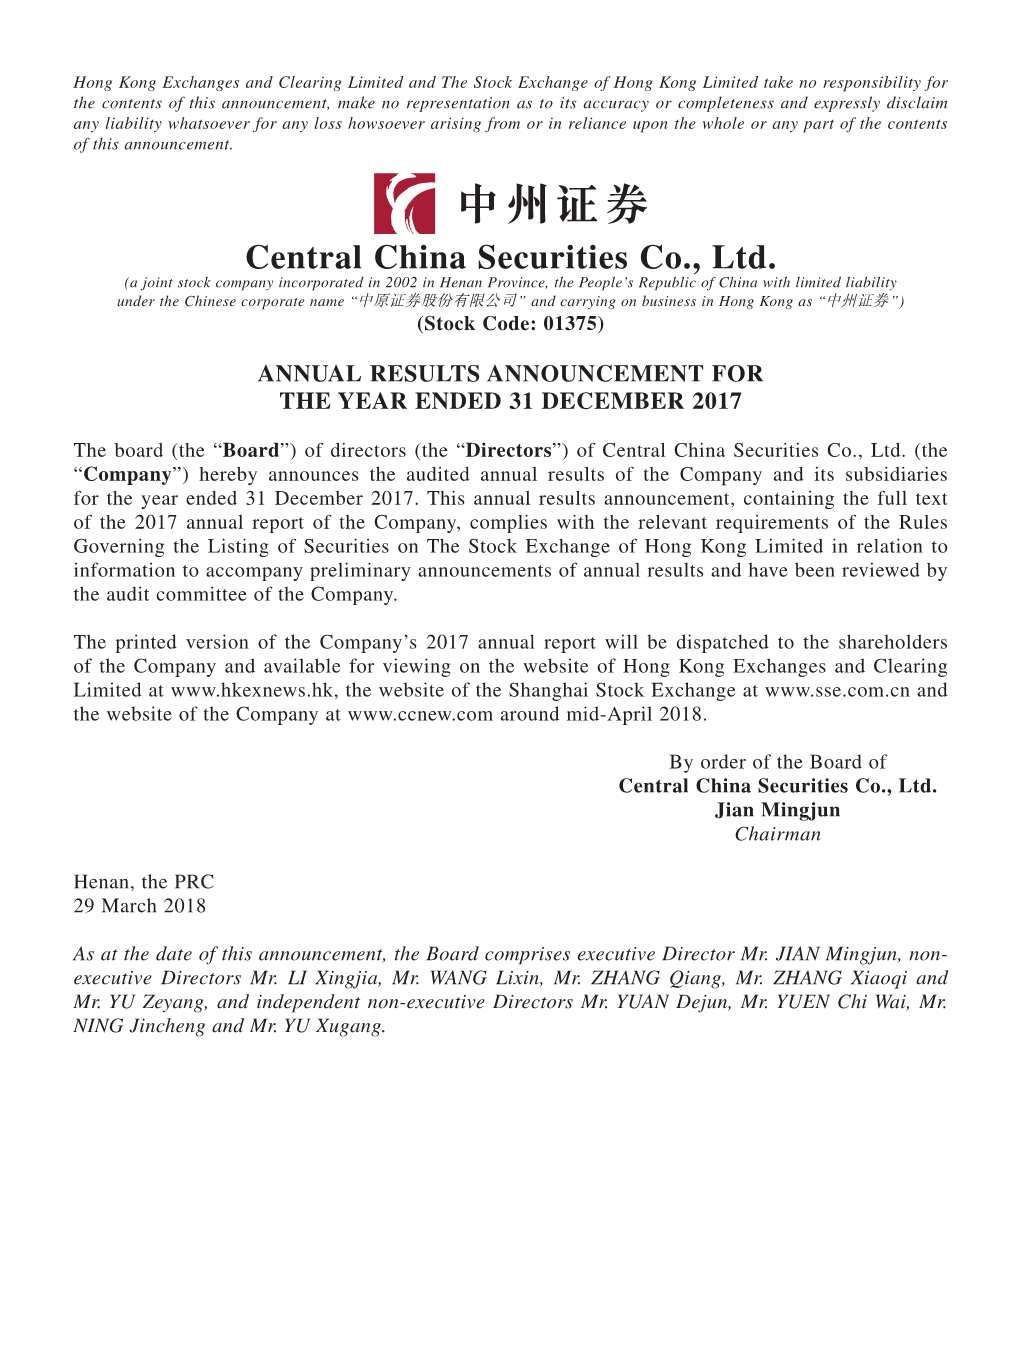 Central China Securities Co., Ltd